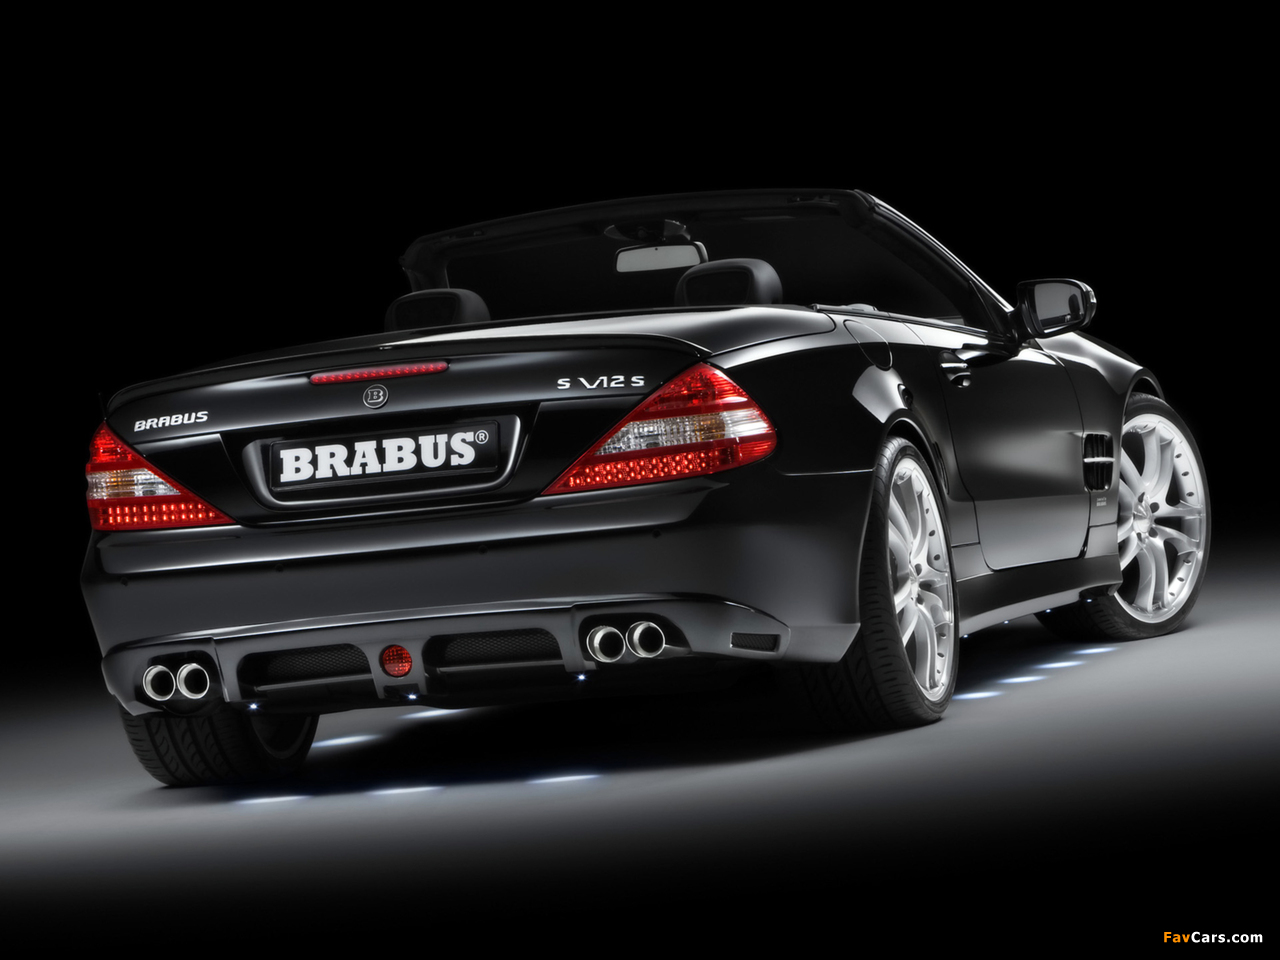 Pictures of Brabus S V12 S (R230) 2008 (1280 x 960)